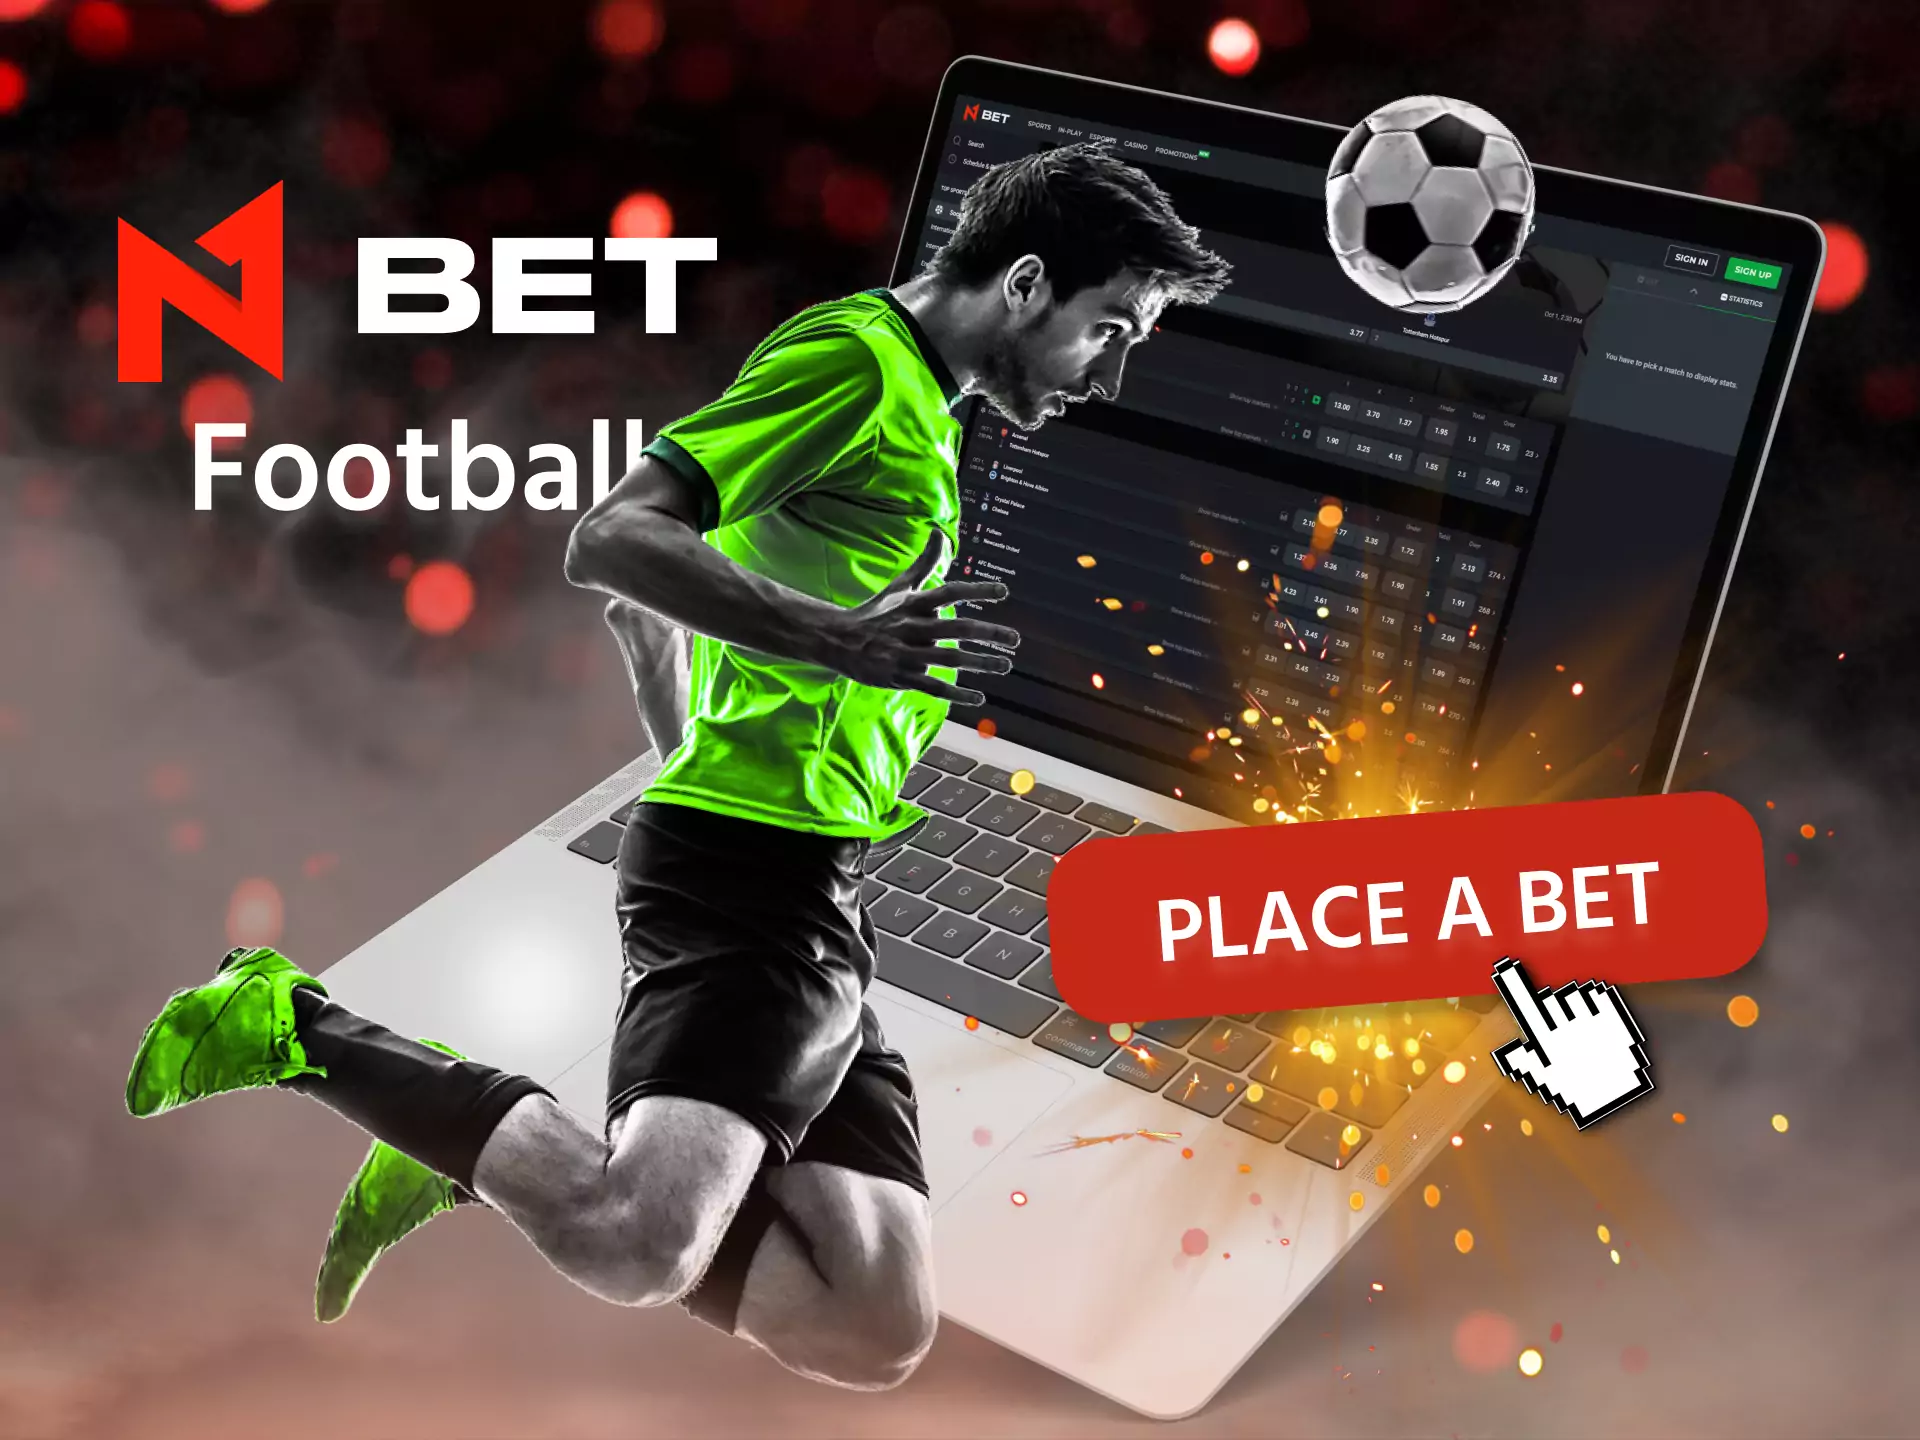 Place bets on football in N1Bet.